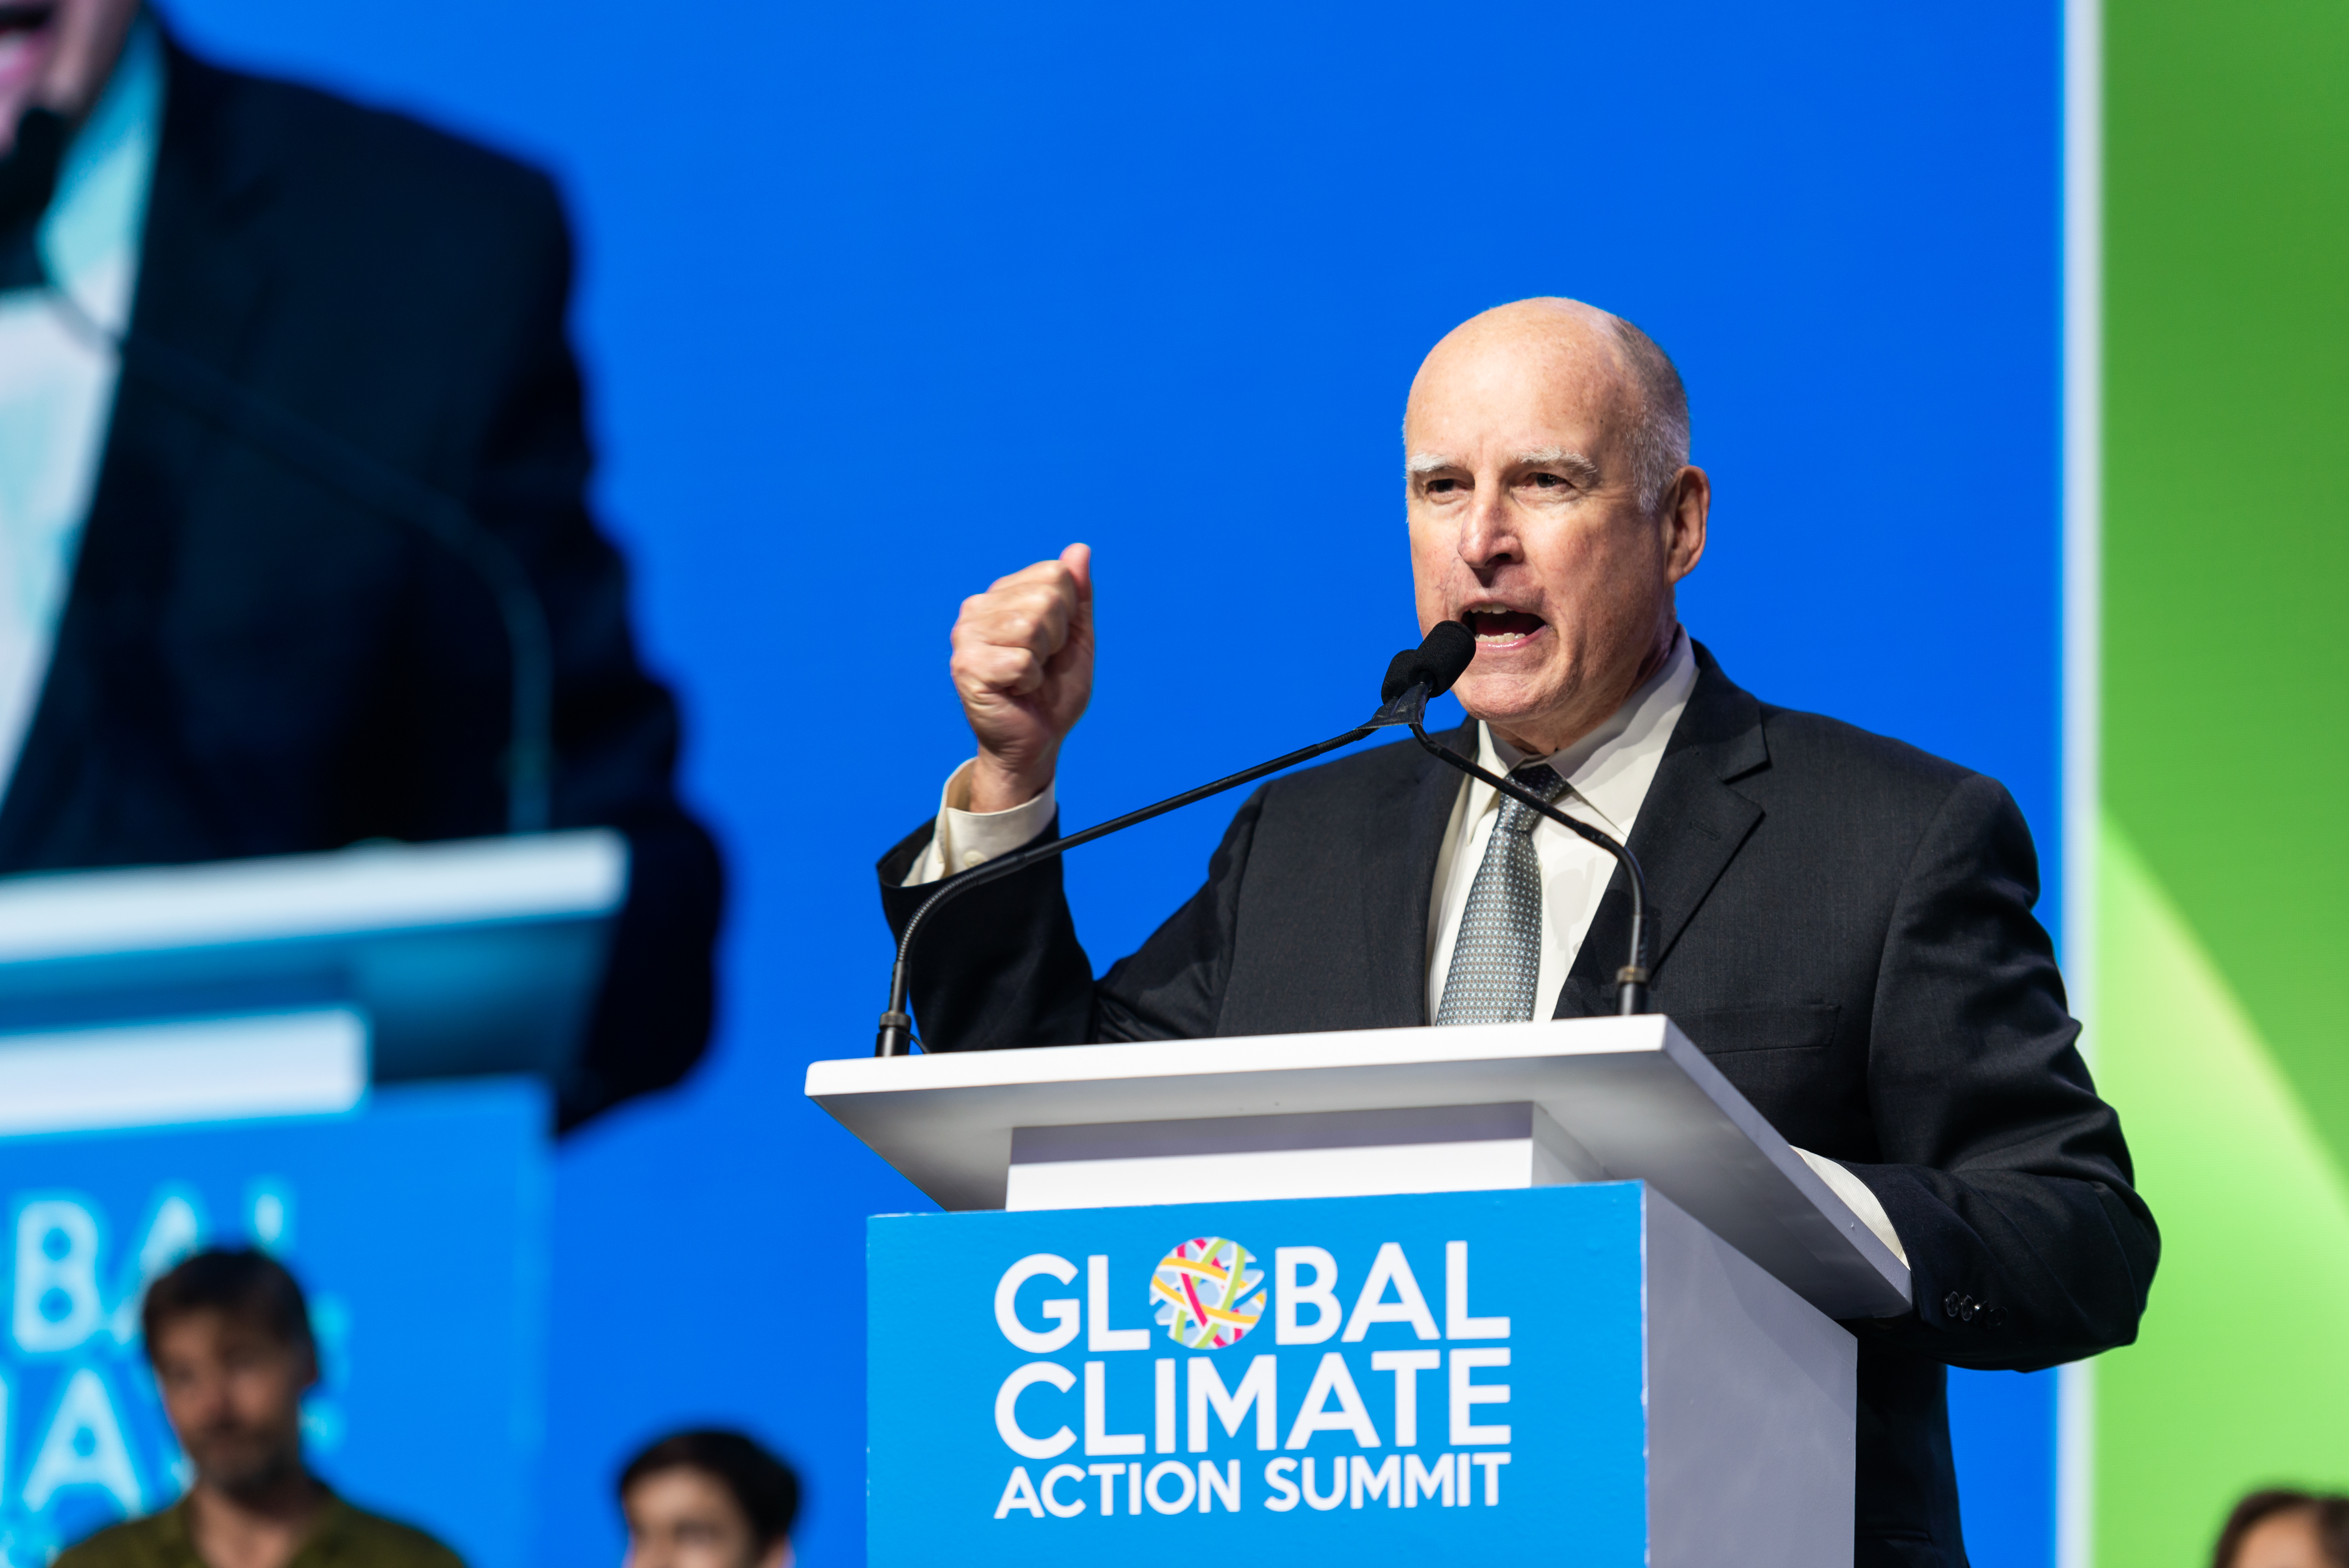 Global Action Climate Summit